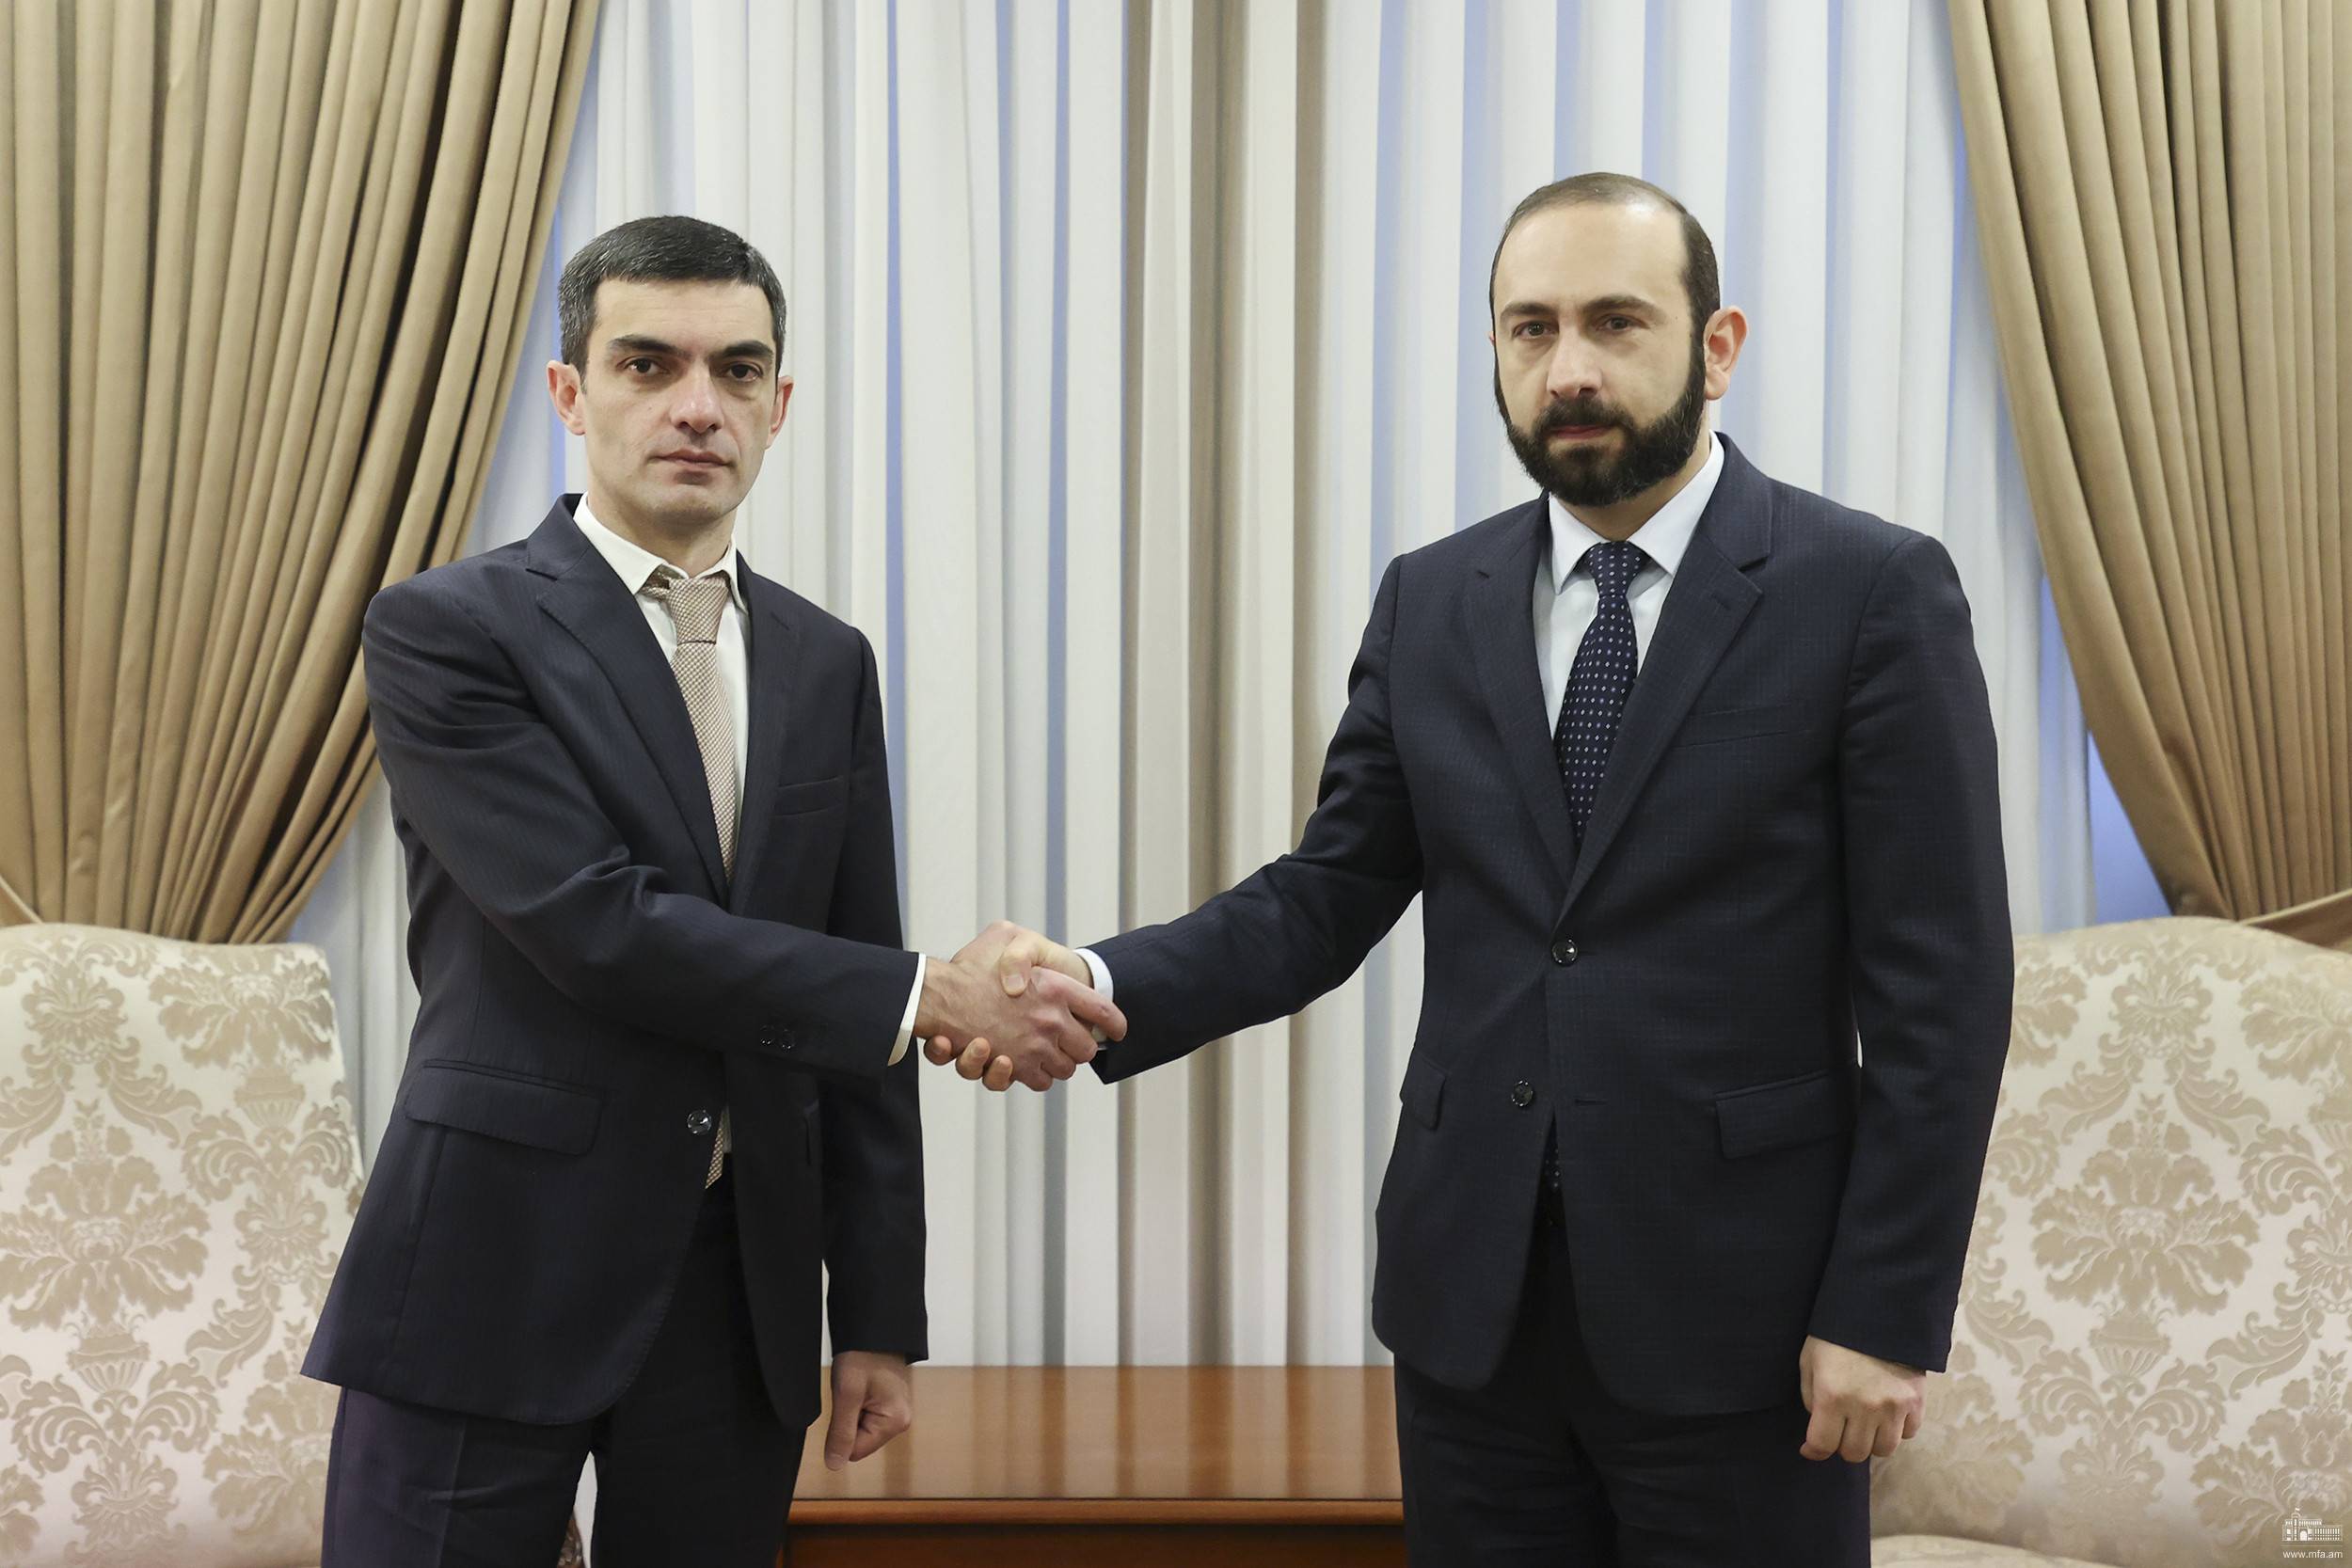 Foreign Ministers of Armenia and Artsakh discussed situation in Nagorno-Karabakh due to blocking of Lachin Corridor